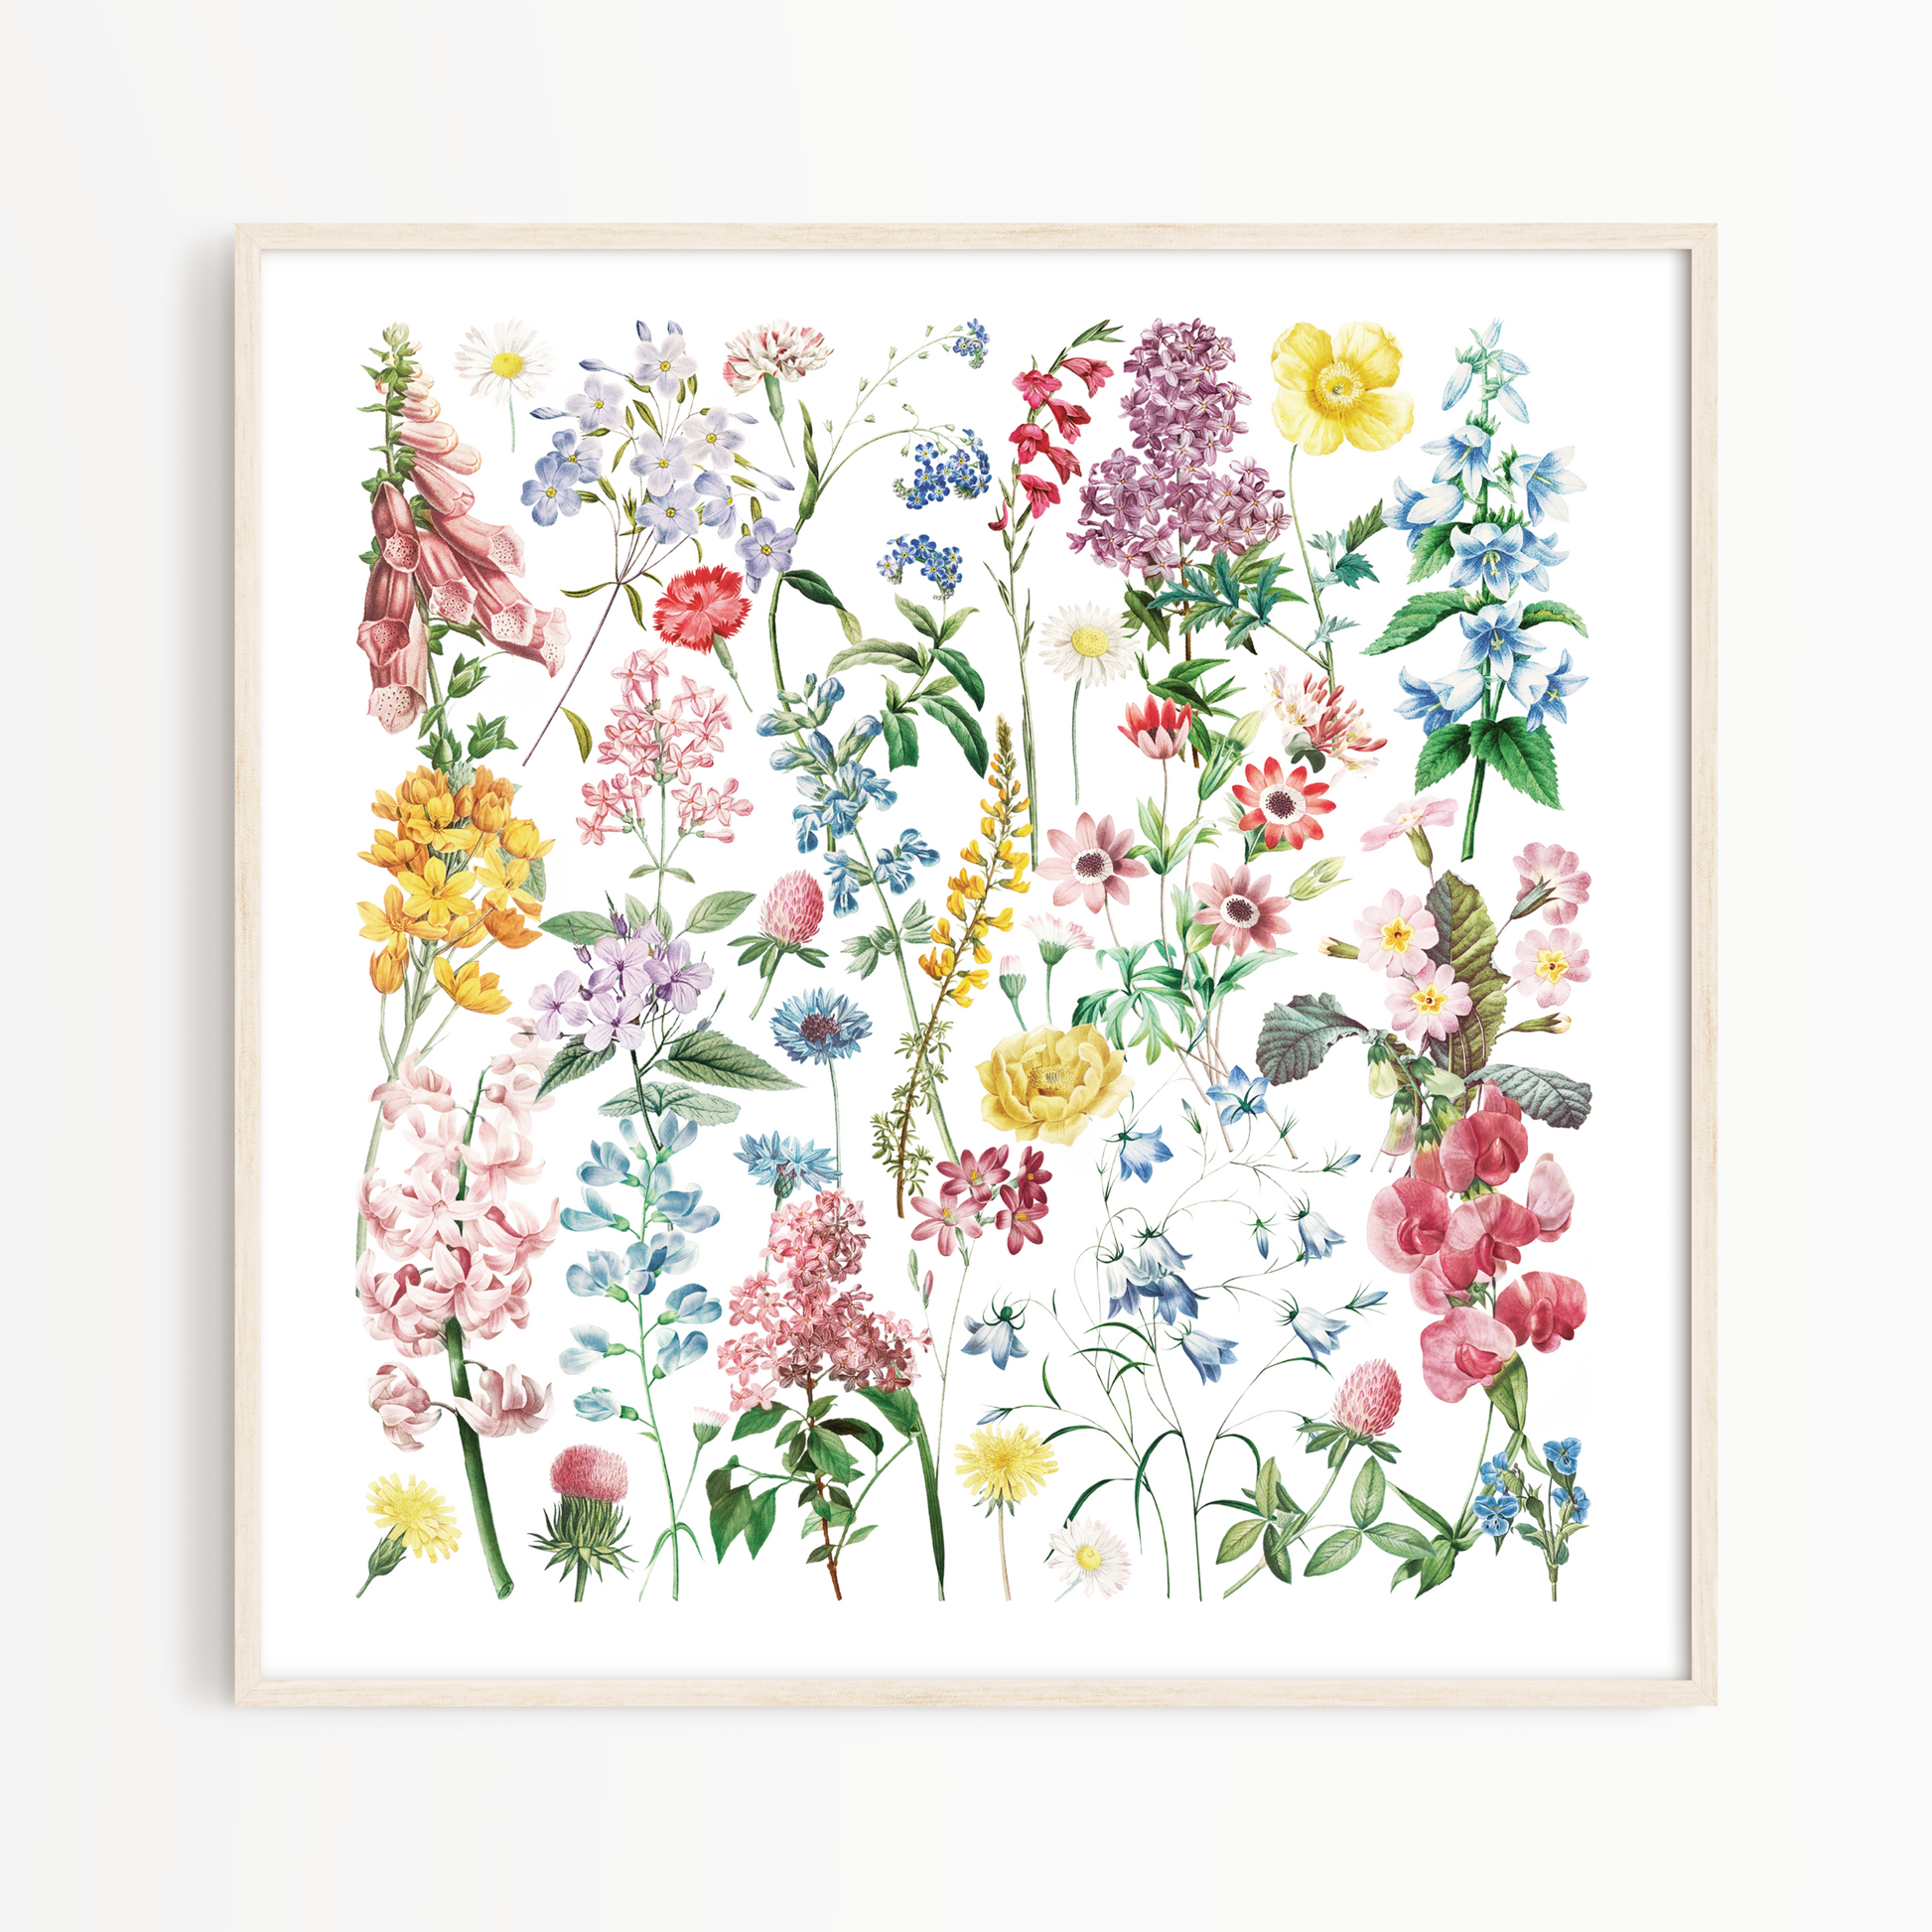 Square-shaped art print showing colourful British wild flower and garden flower watercolour painting illustrations. Flowers include foxglove, daisy, cornflower, sweet peas, forget me nots, hyacinths, red clover and primroses. 